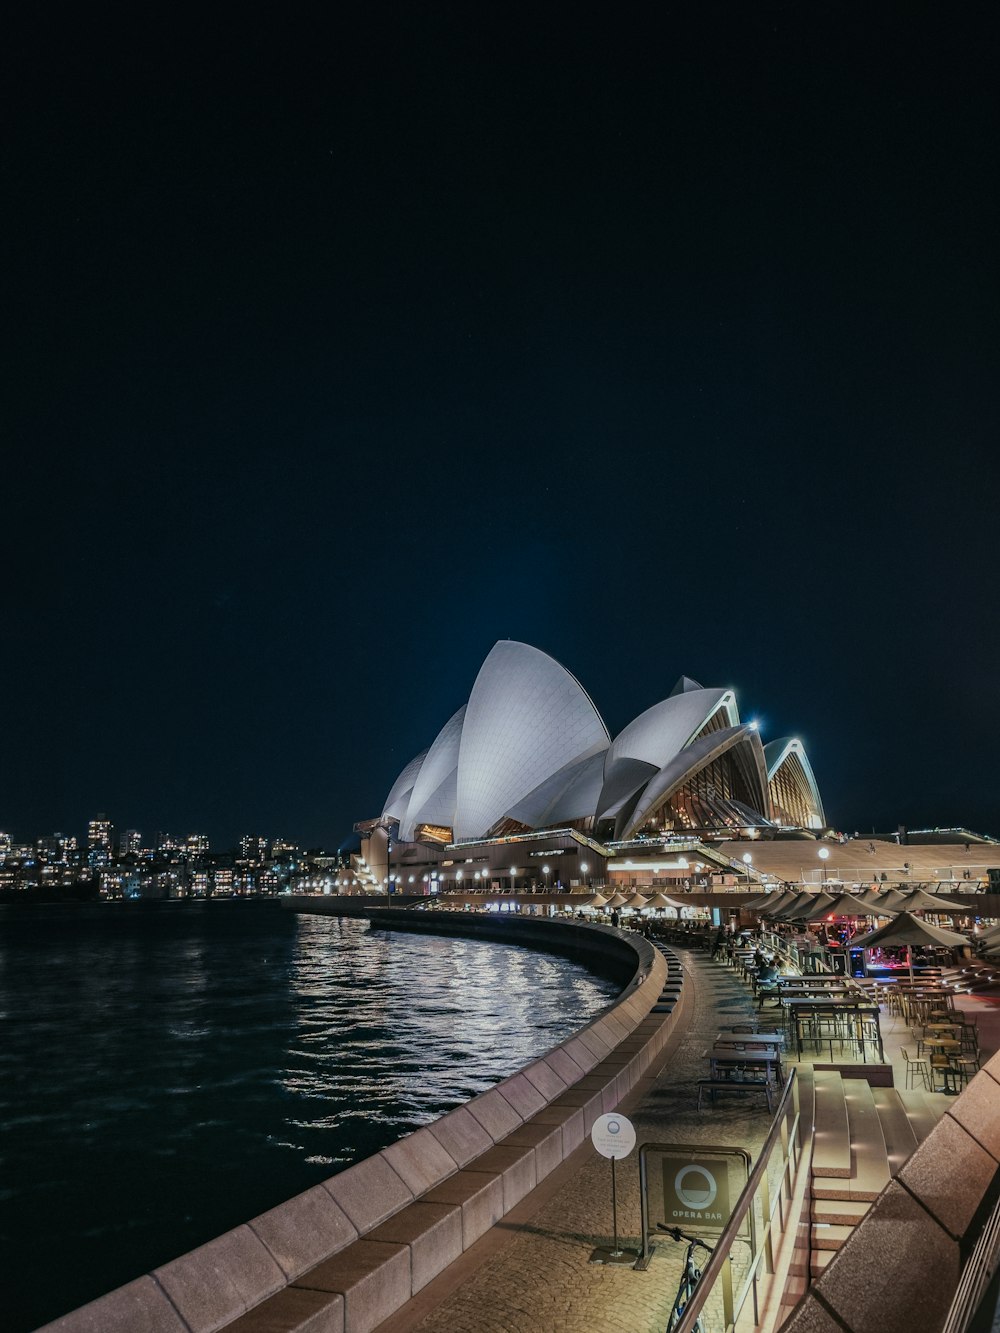 a view of the sydney opera house at night